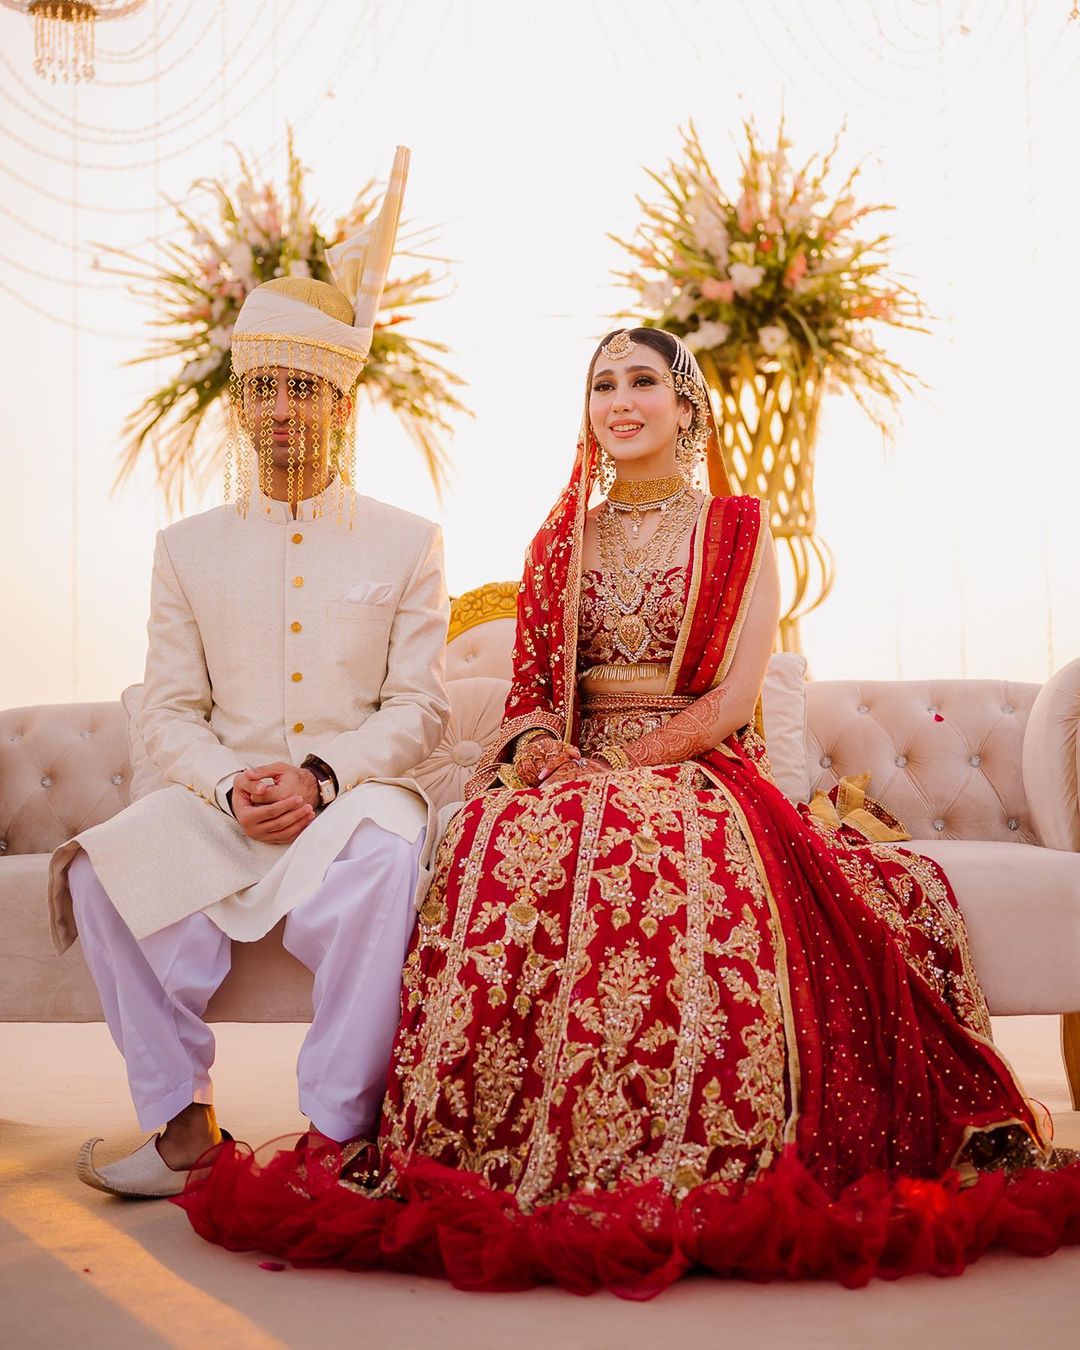 What to wear on your Nikah? Here are some Elegant yet modern Muslim bridal  looks!